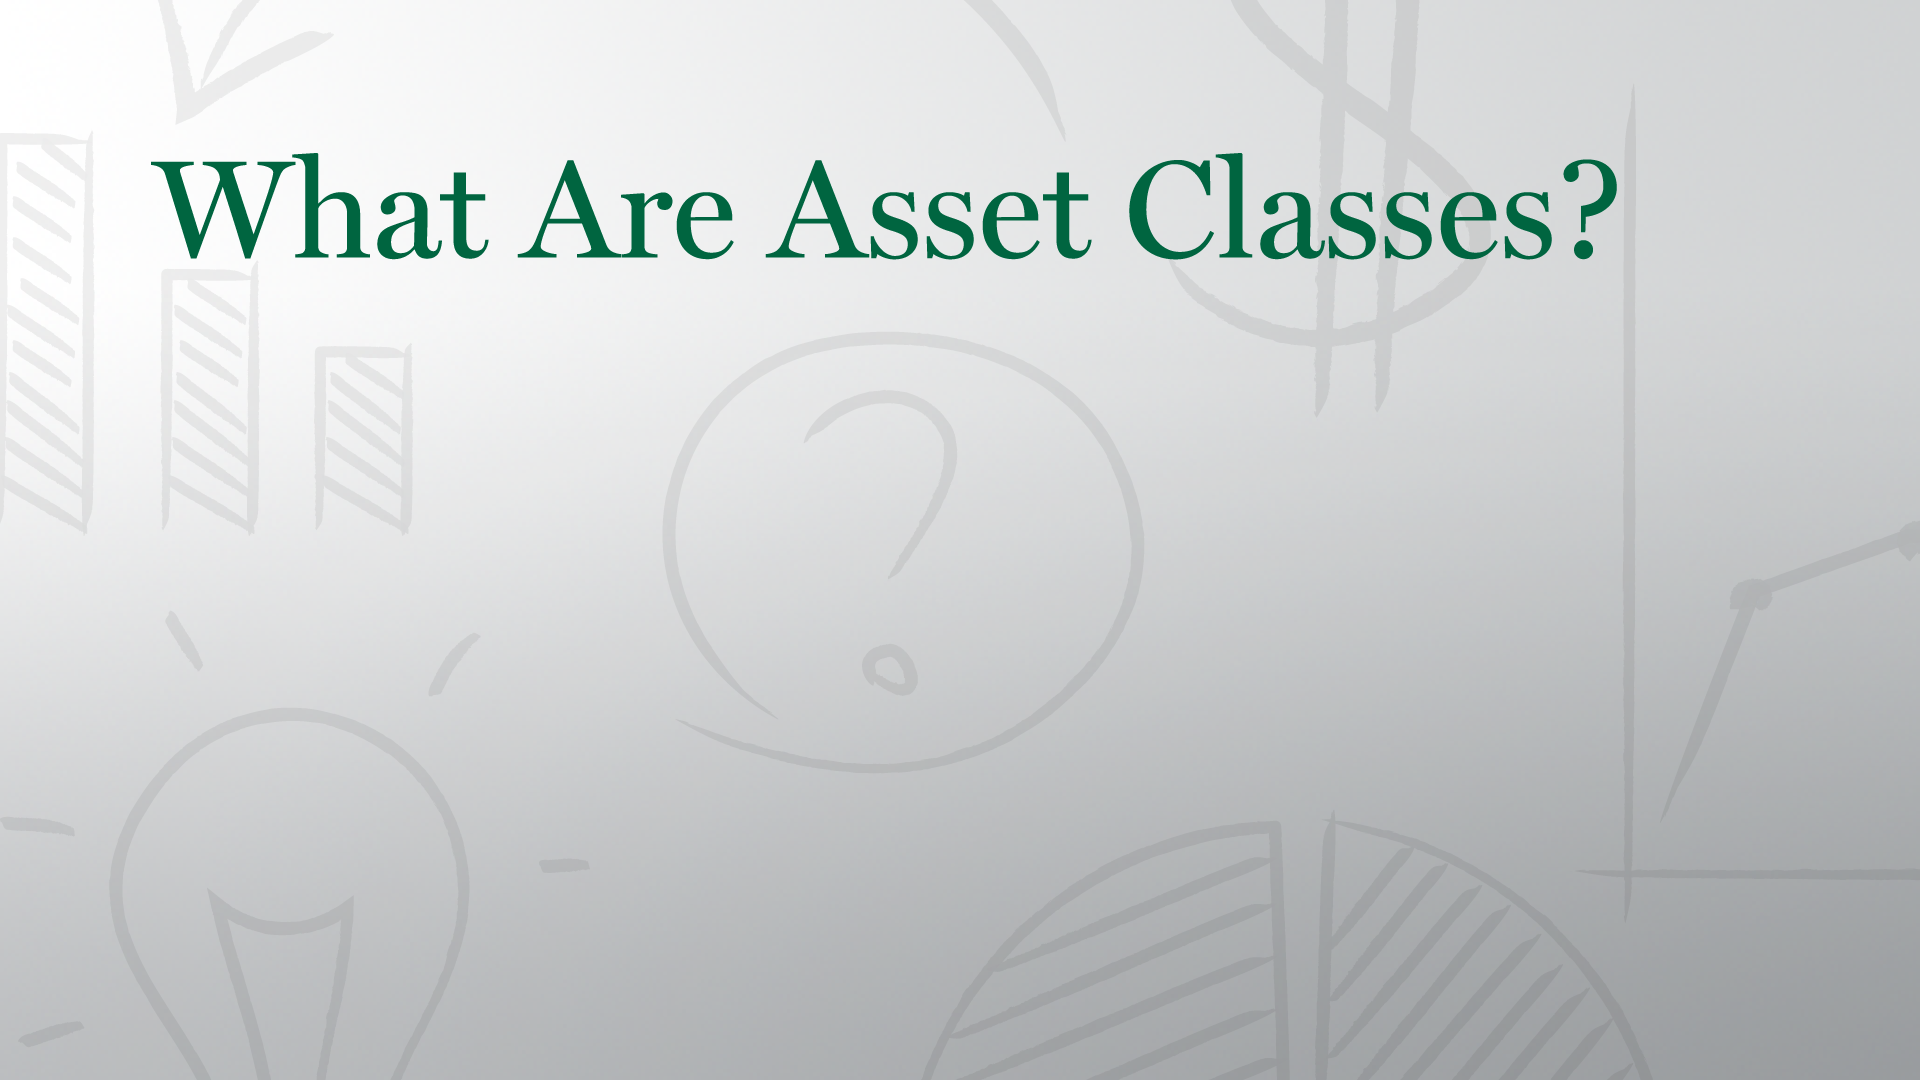 What Are Asset Classes?